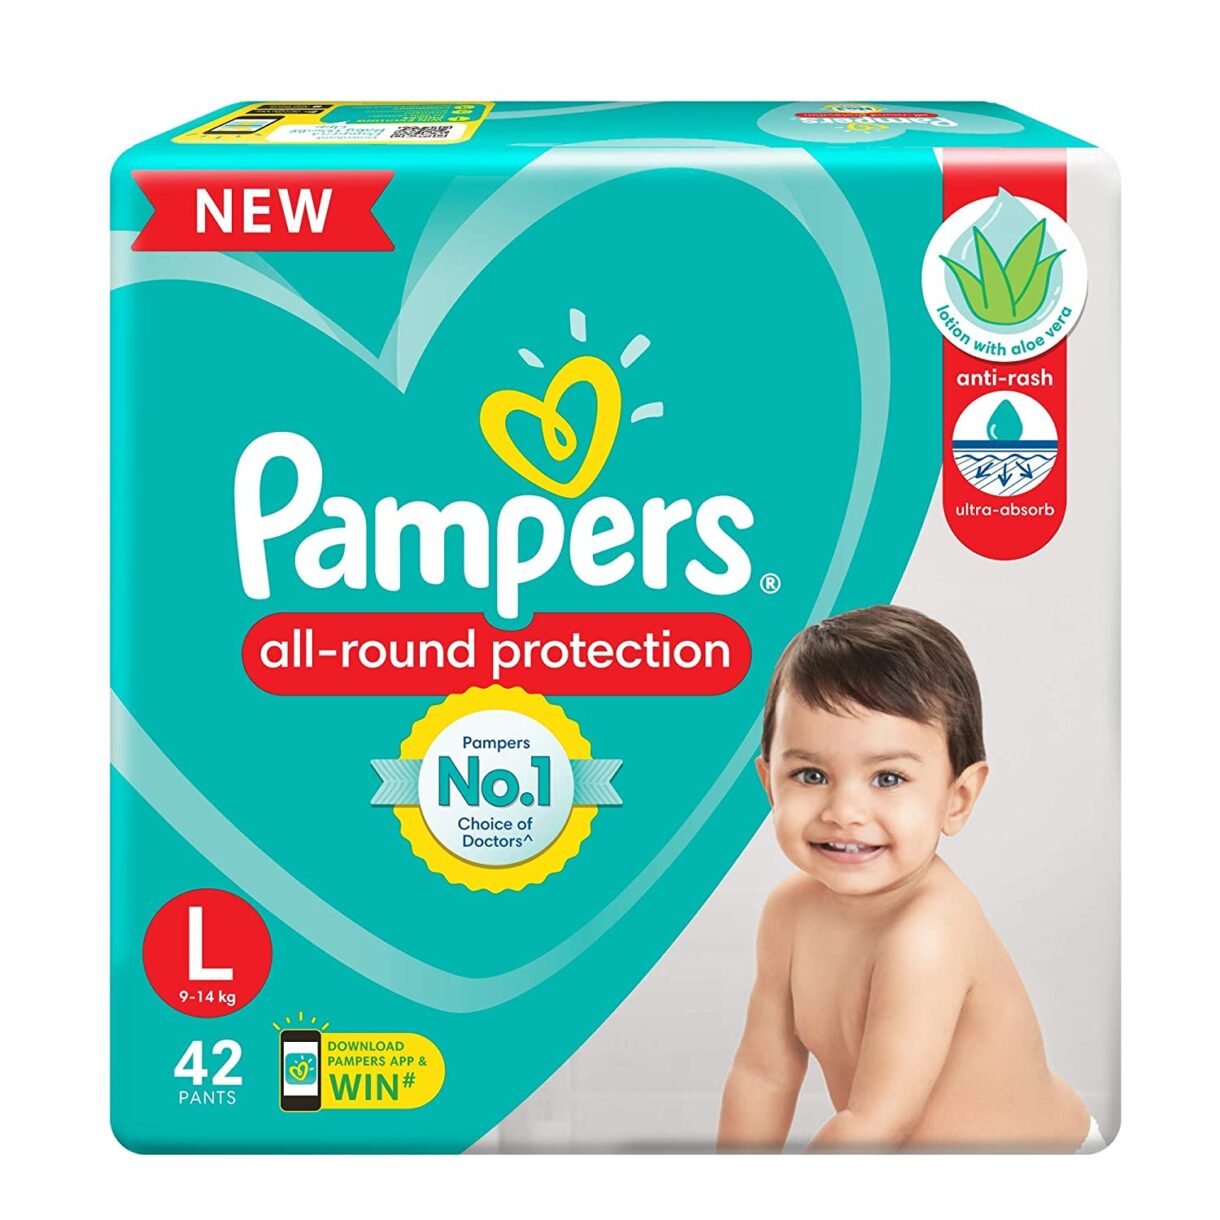 Pampers All round Protection Pants, Large size baby diapers (LG) 42 Count